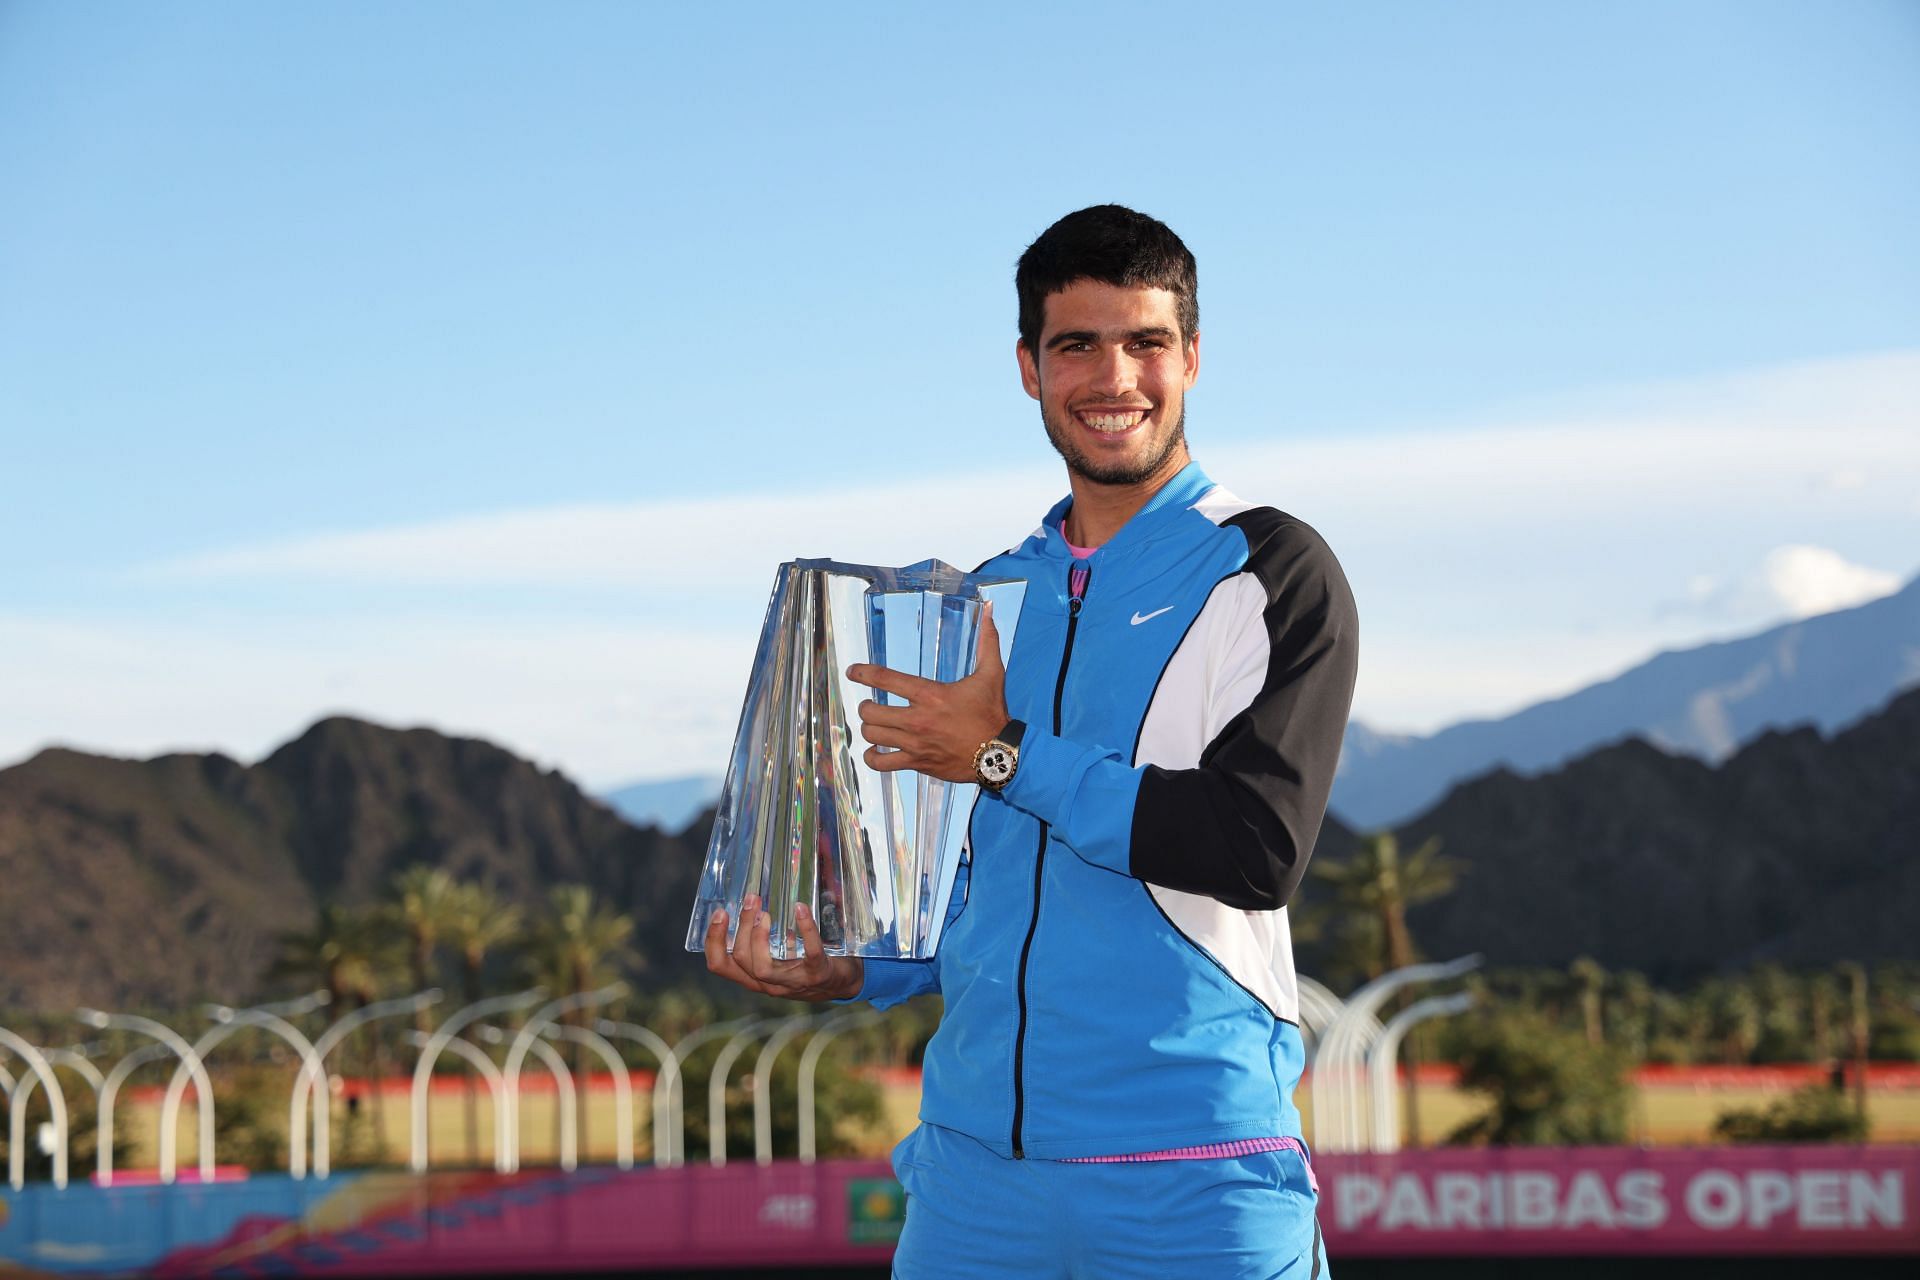 Carlos Alcaraz won the Indian Wells Masters for the second time last week